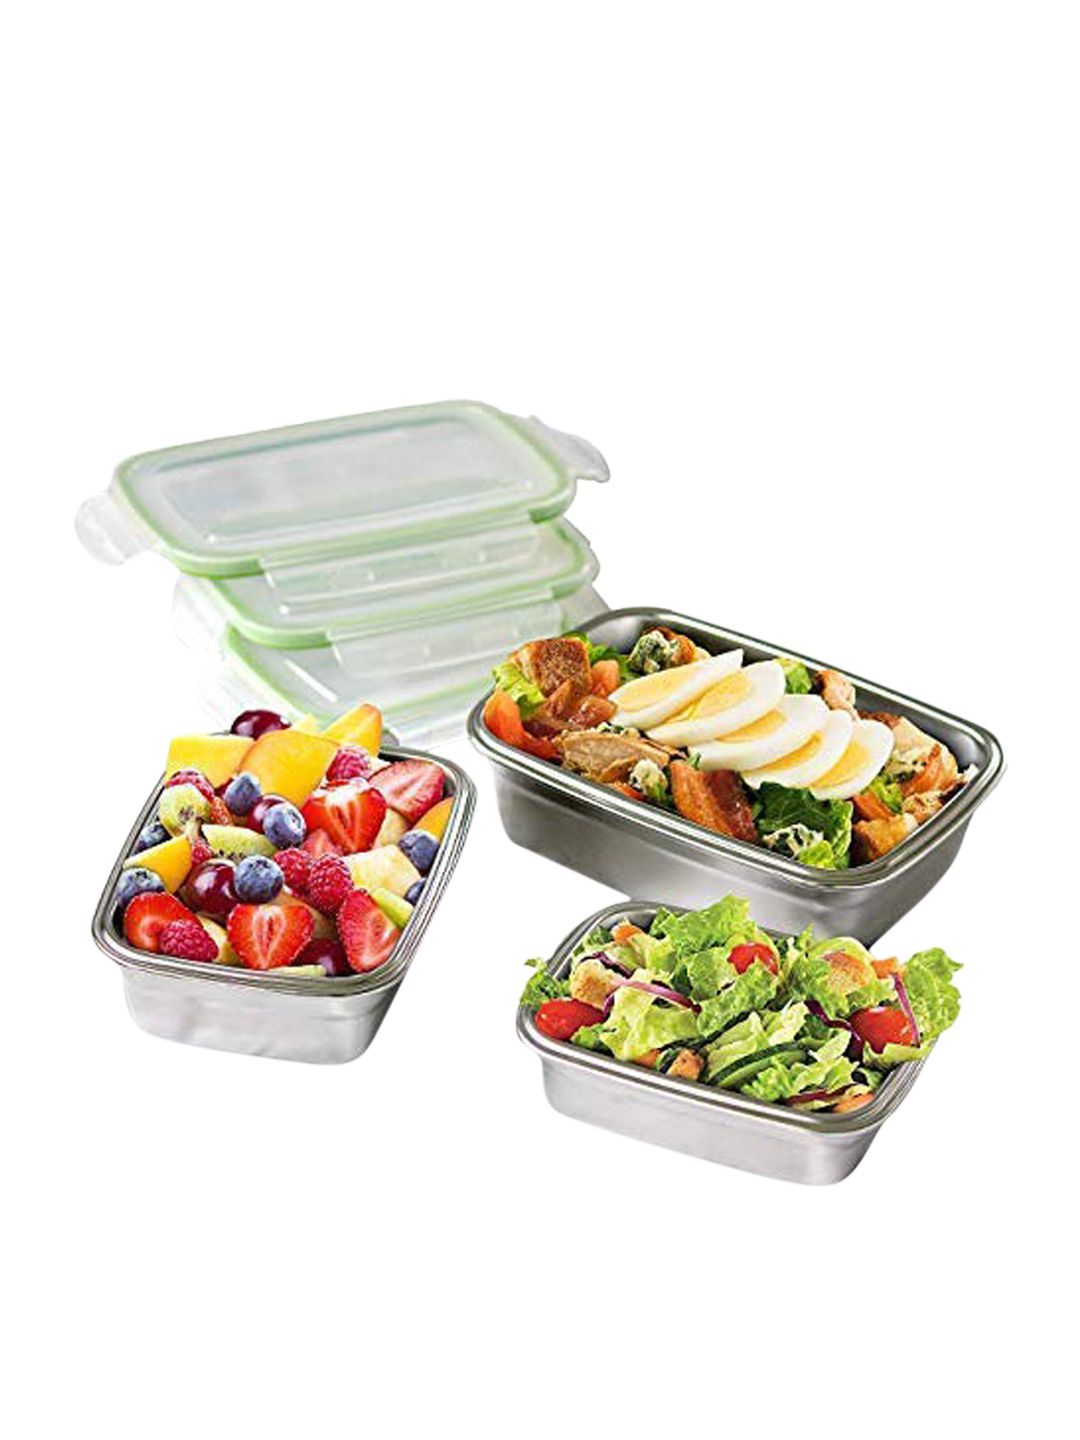 Femora Stainless Steel 3800ml Lunch Box Price in India